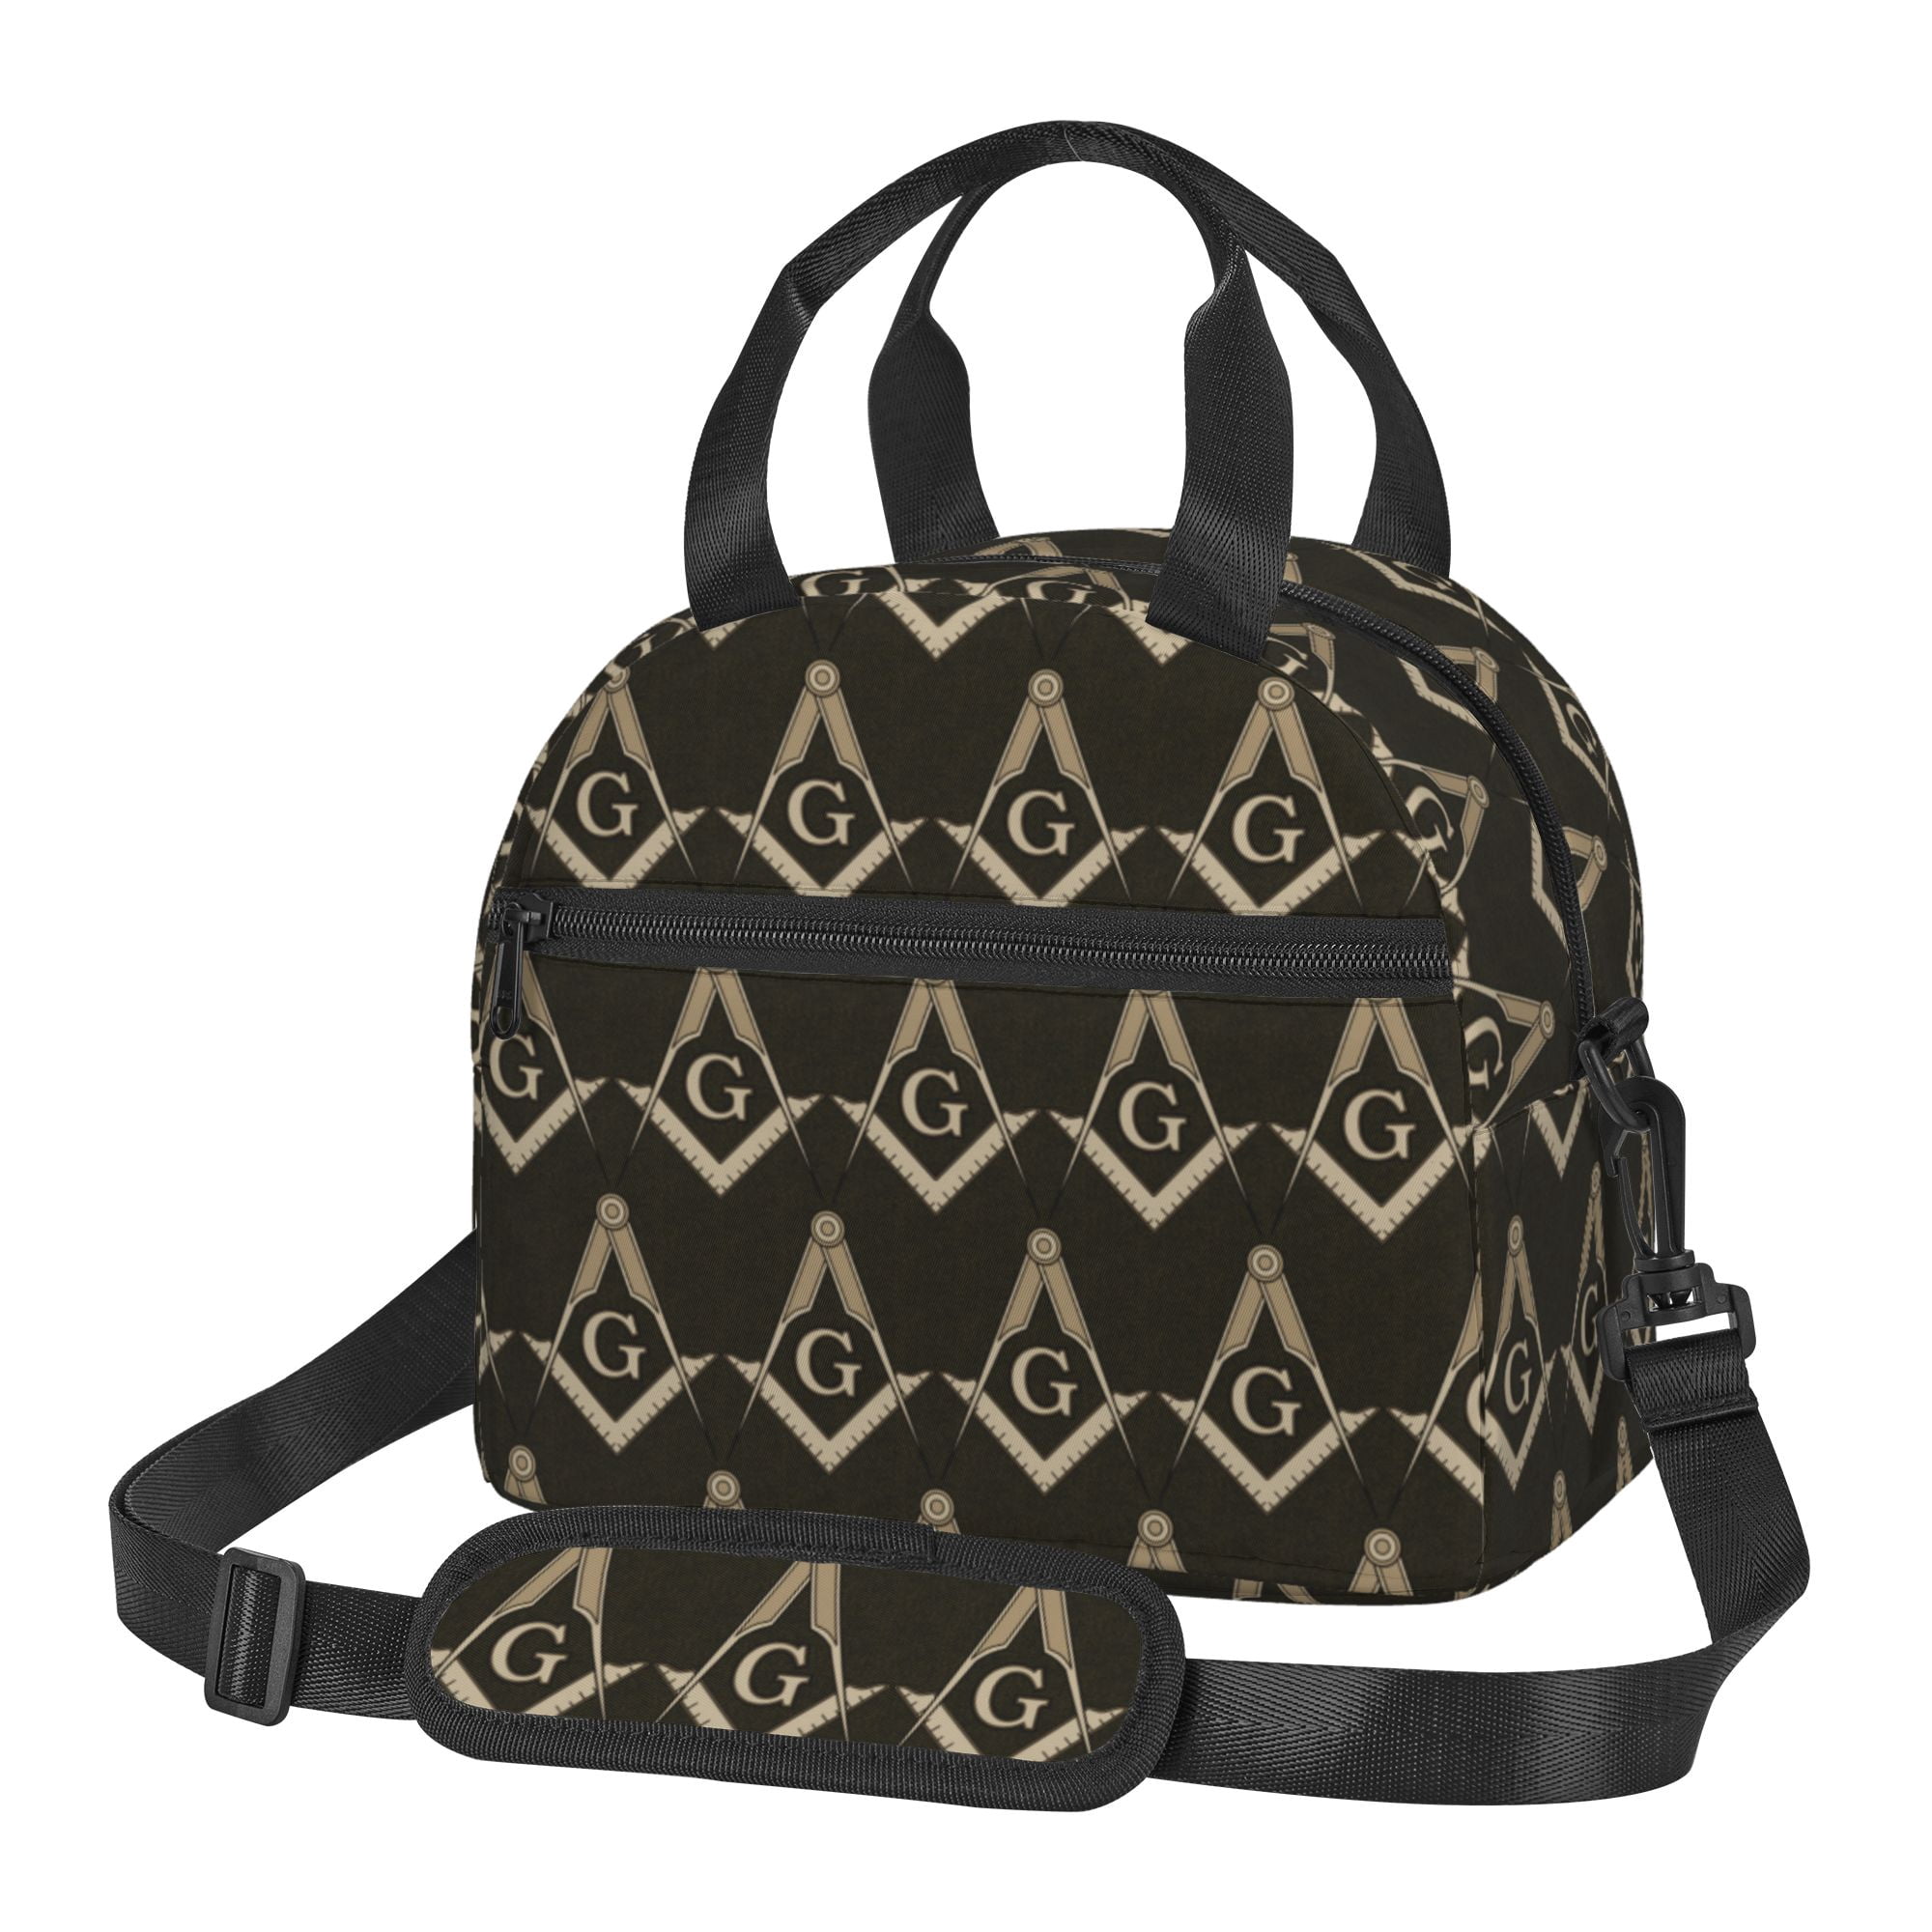 DouZhe Lunch Bags for Women and Men, Brown Mason Freemason Symbol Prints  Reusable Portable Insulated Cooler Waterproof Lunch Tote Bag for Travel  Work School Picnic 